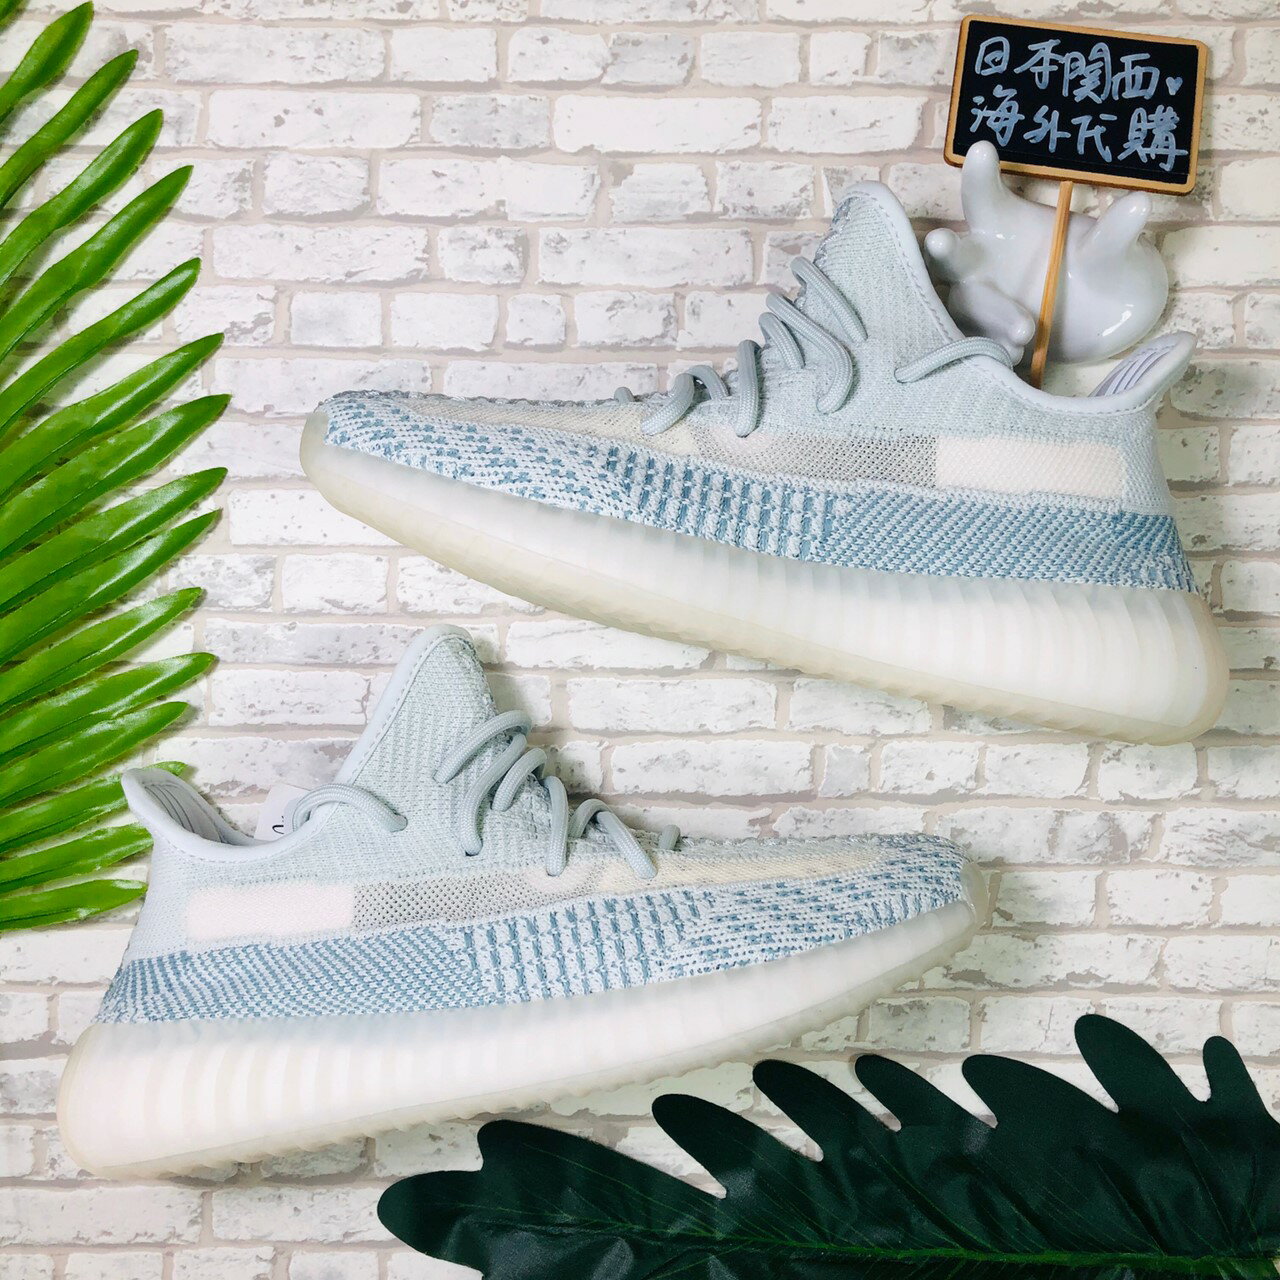 FW3043 Adidas Yeezy Boost 350 V2 Cloud White Ice Blue Non-Reflective